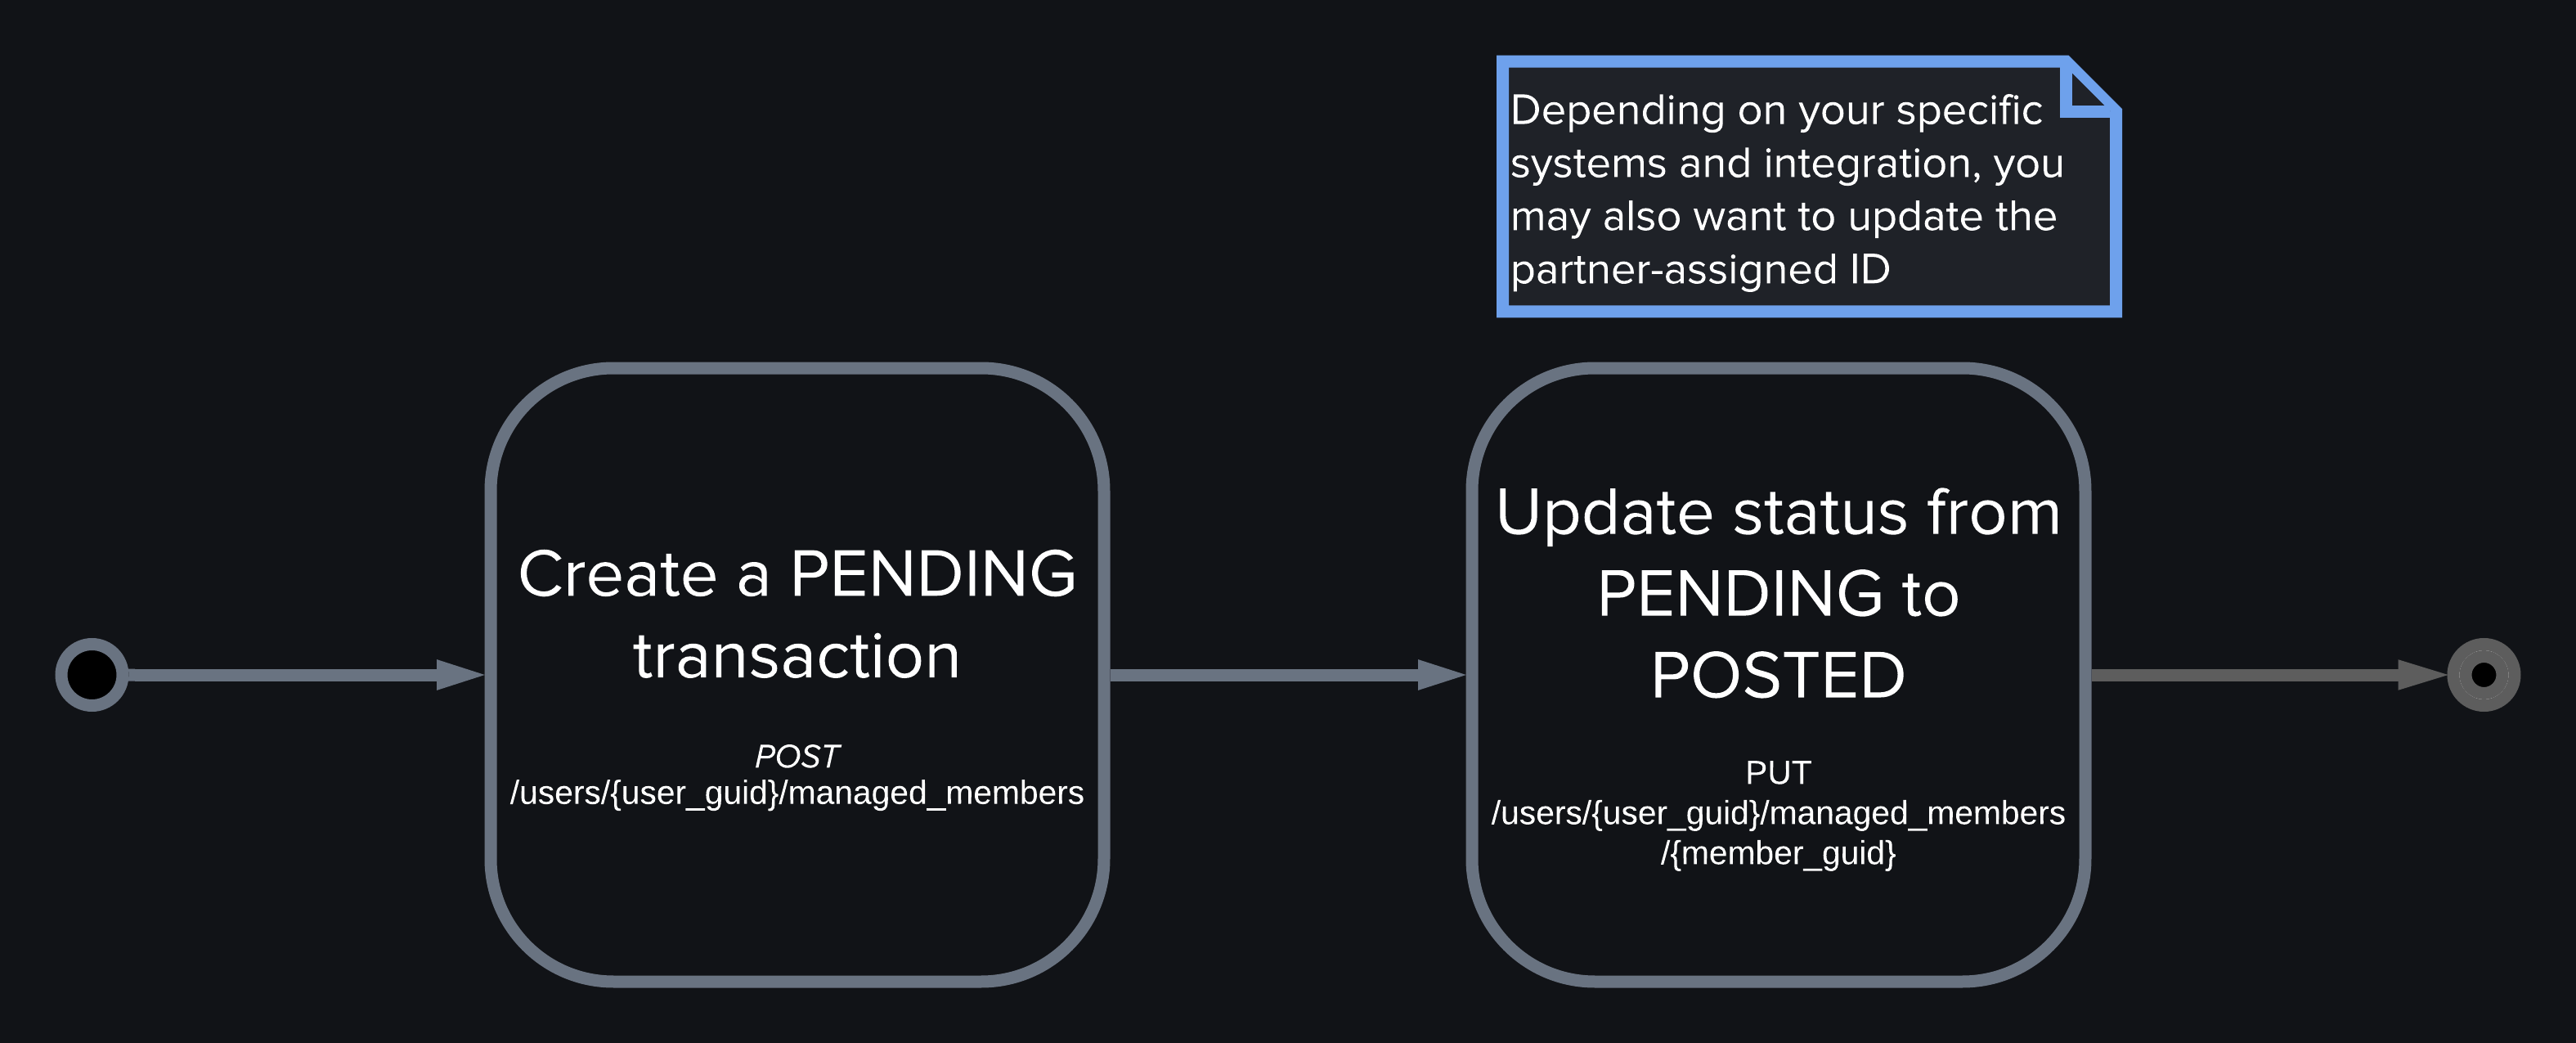 Workflow of pending and posted transactions